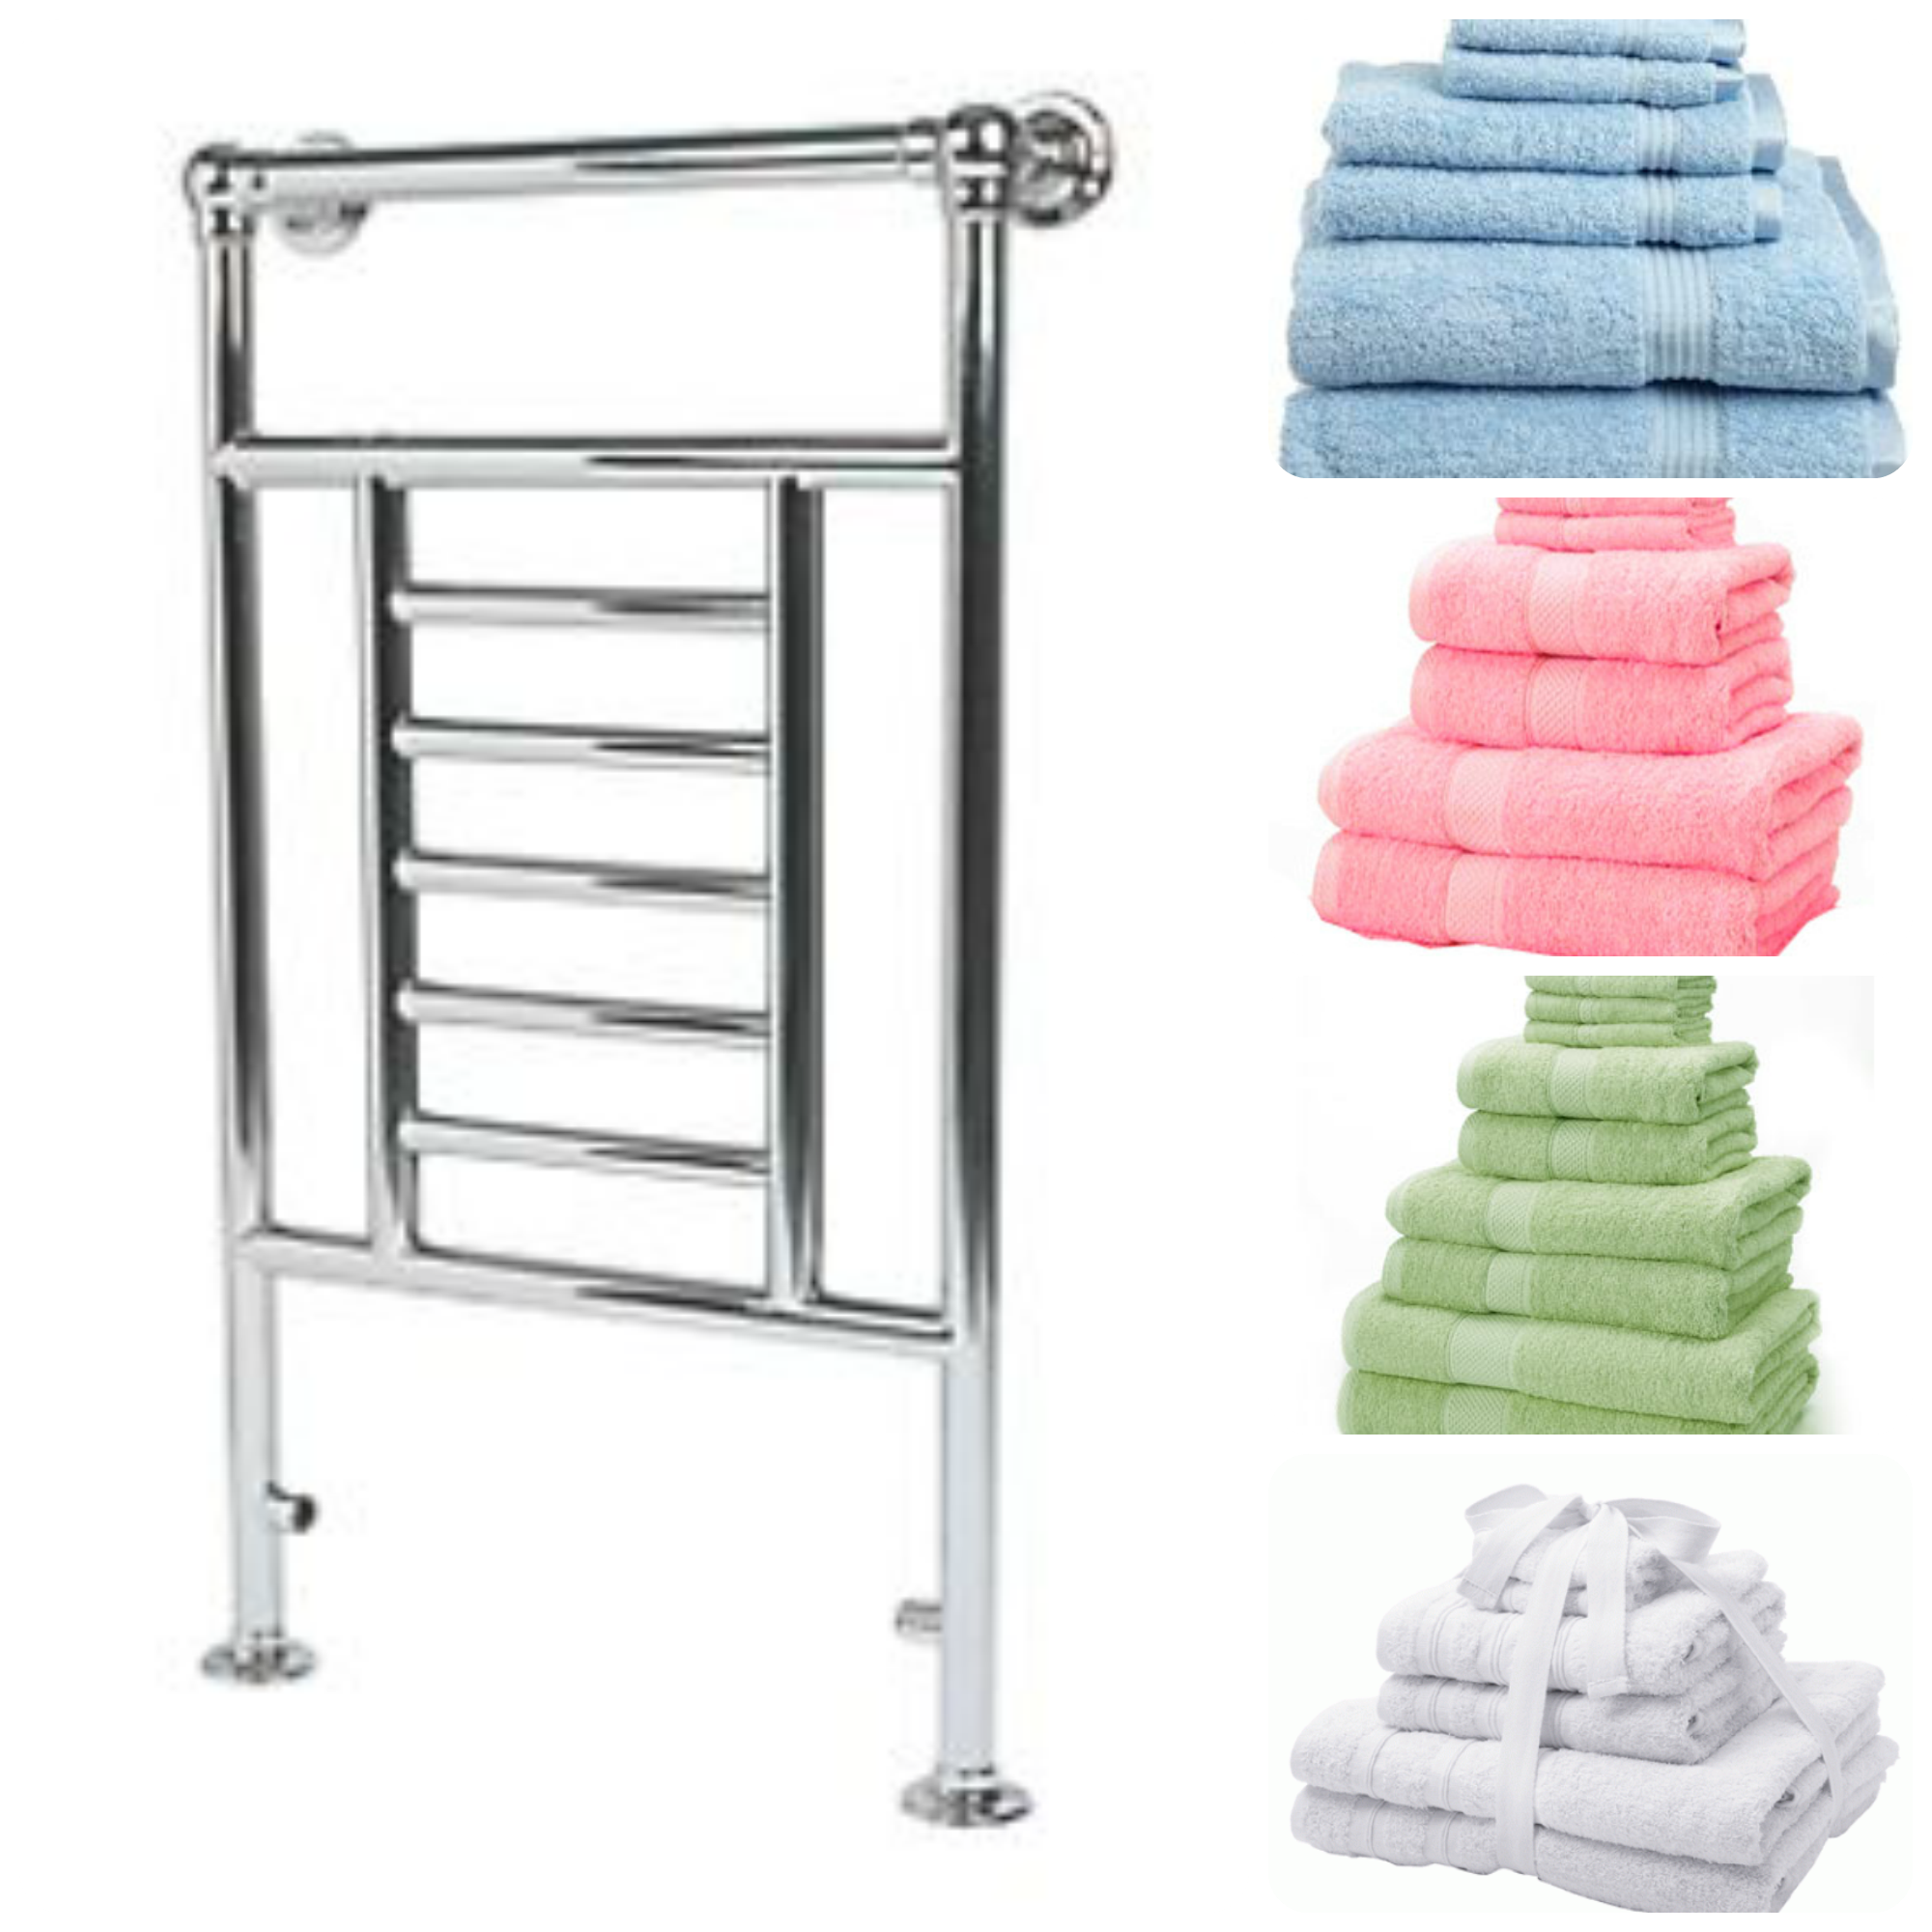 heated towel rail and towel bundles in blue, pink, green and white